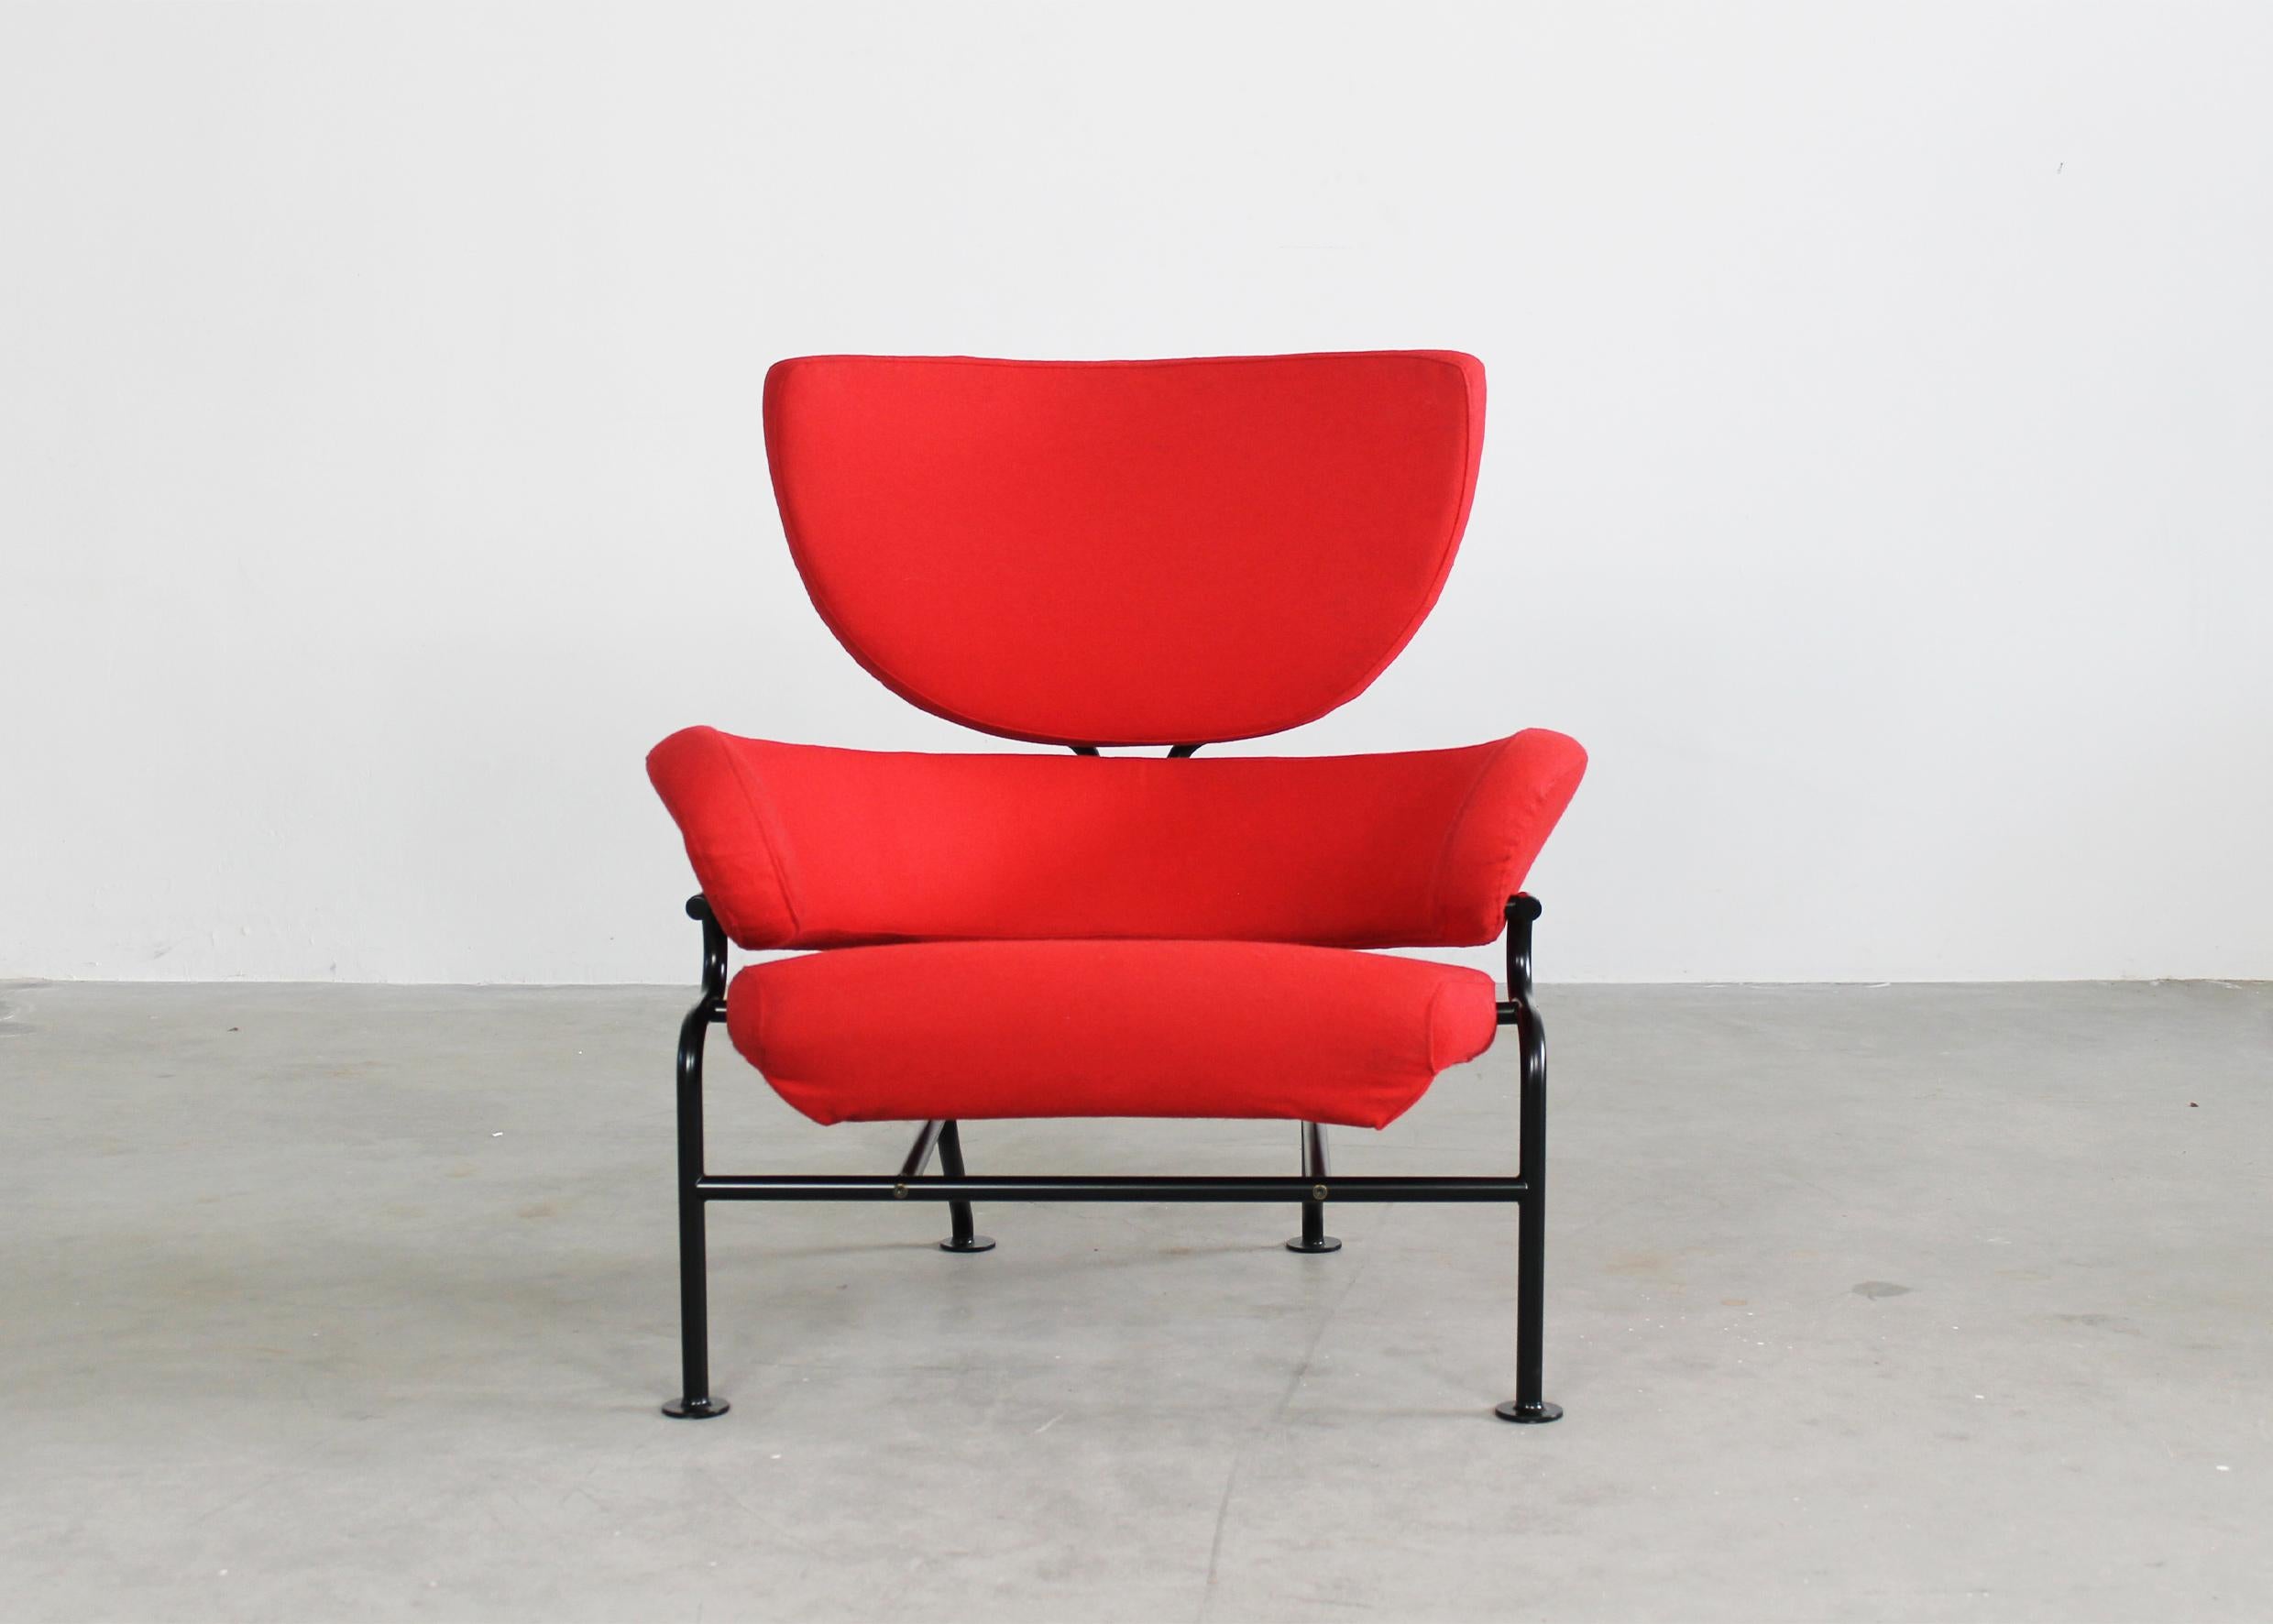 PL19 or Tre Pezzi armchair with frame in black lacquered tubular steel, seat and back in padded red fabric. 
Designed by Franco Albini and Franca Helg in 1959 for the Nuove terme Luigi Zoja in Salsomaggiore, Italy, and produced by Poggi, Pavia